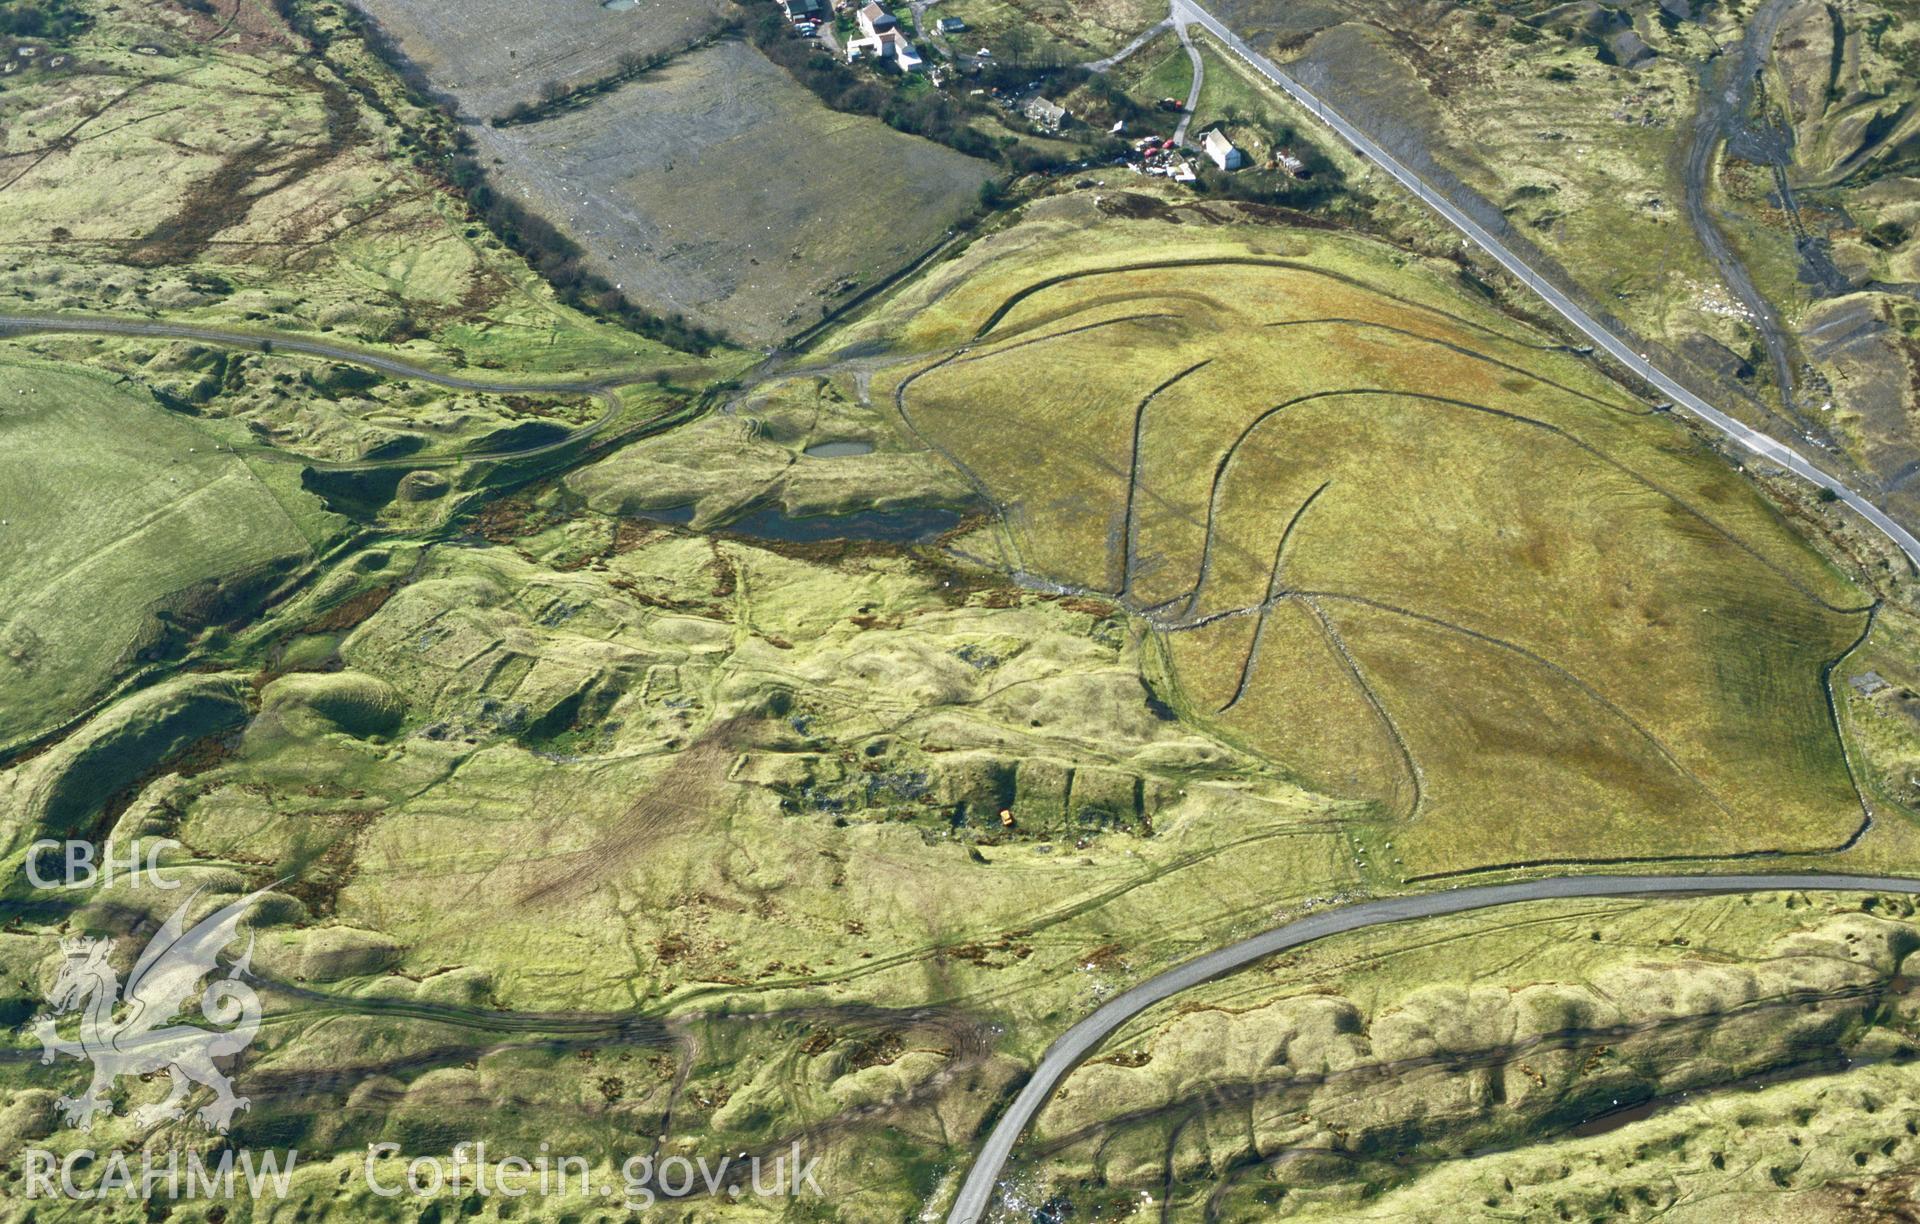 RCAHMW colour slide oblique aerial photograph of the deserted iron mining village, Ffos-y-fran, taken on 15/03/1999 by Toby Driver